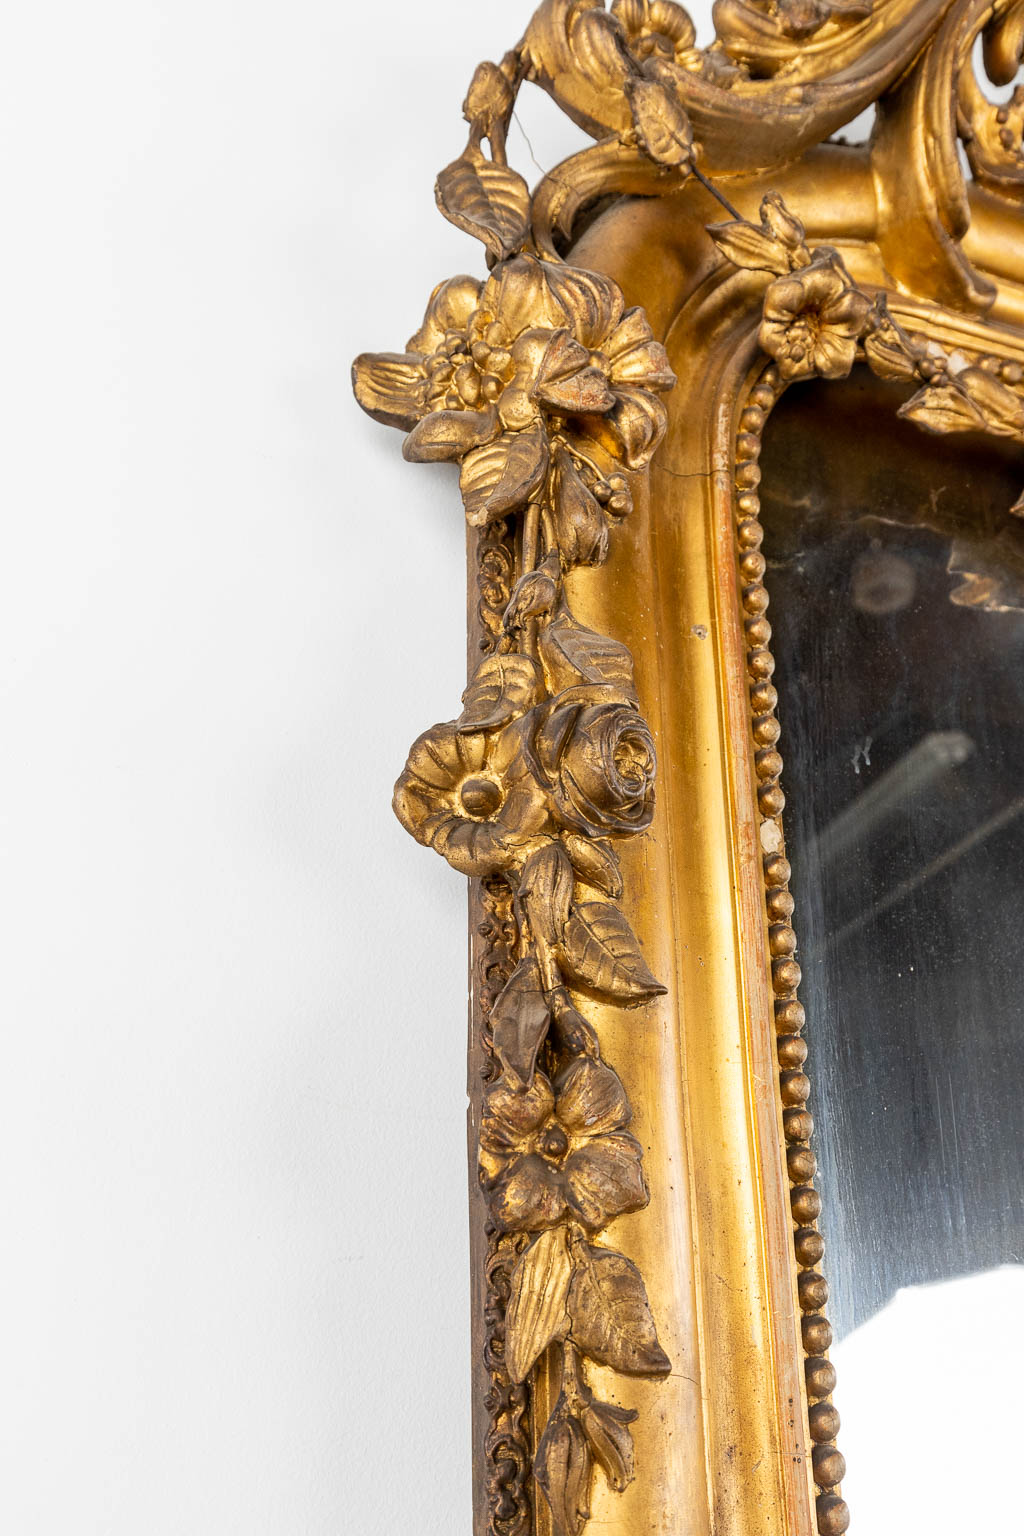 A large and antique mirror, gilt stucco in Louis XV style. 19th C. (W:130 x H:238 cm)